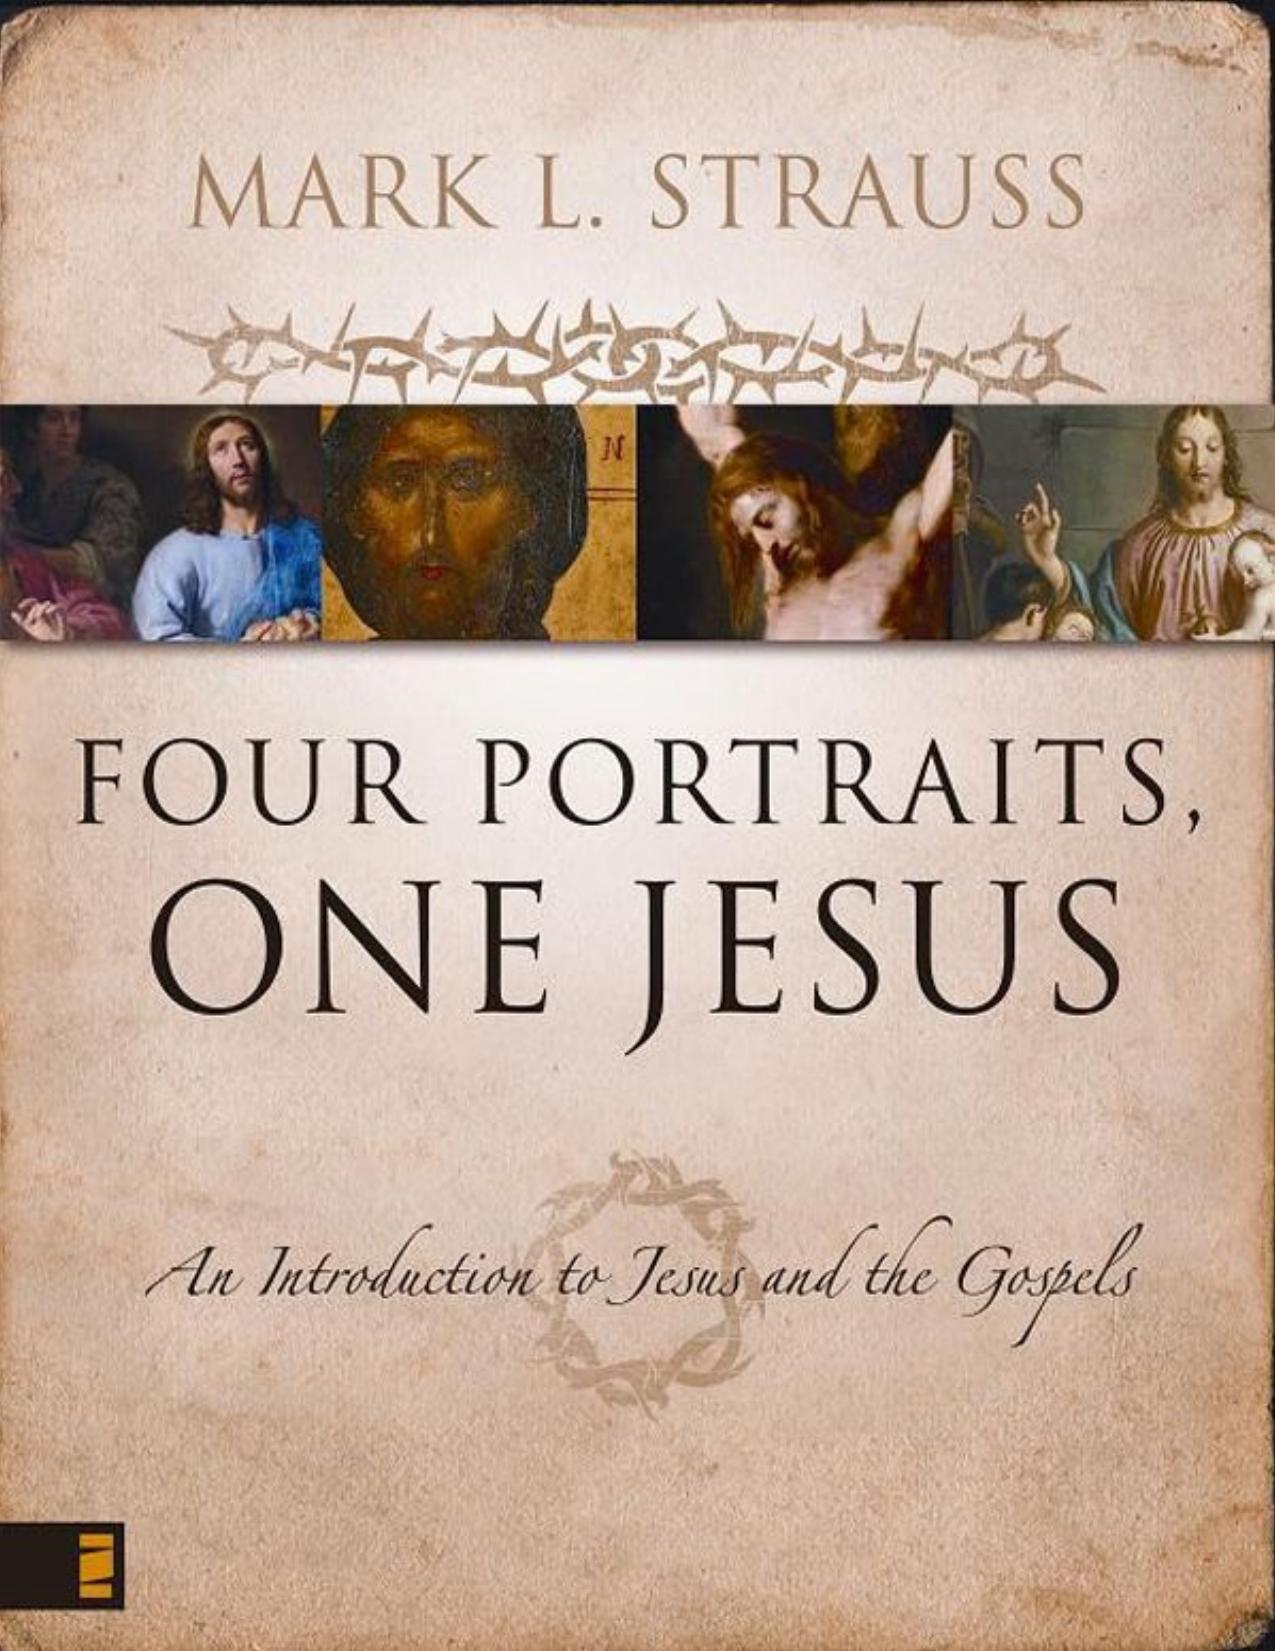 Four Portraits, One Jesus An Introduction to Jesus and the Gospels - PDFDrive.com